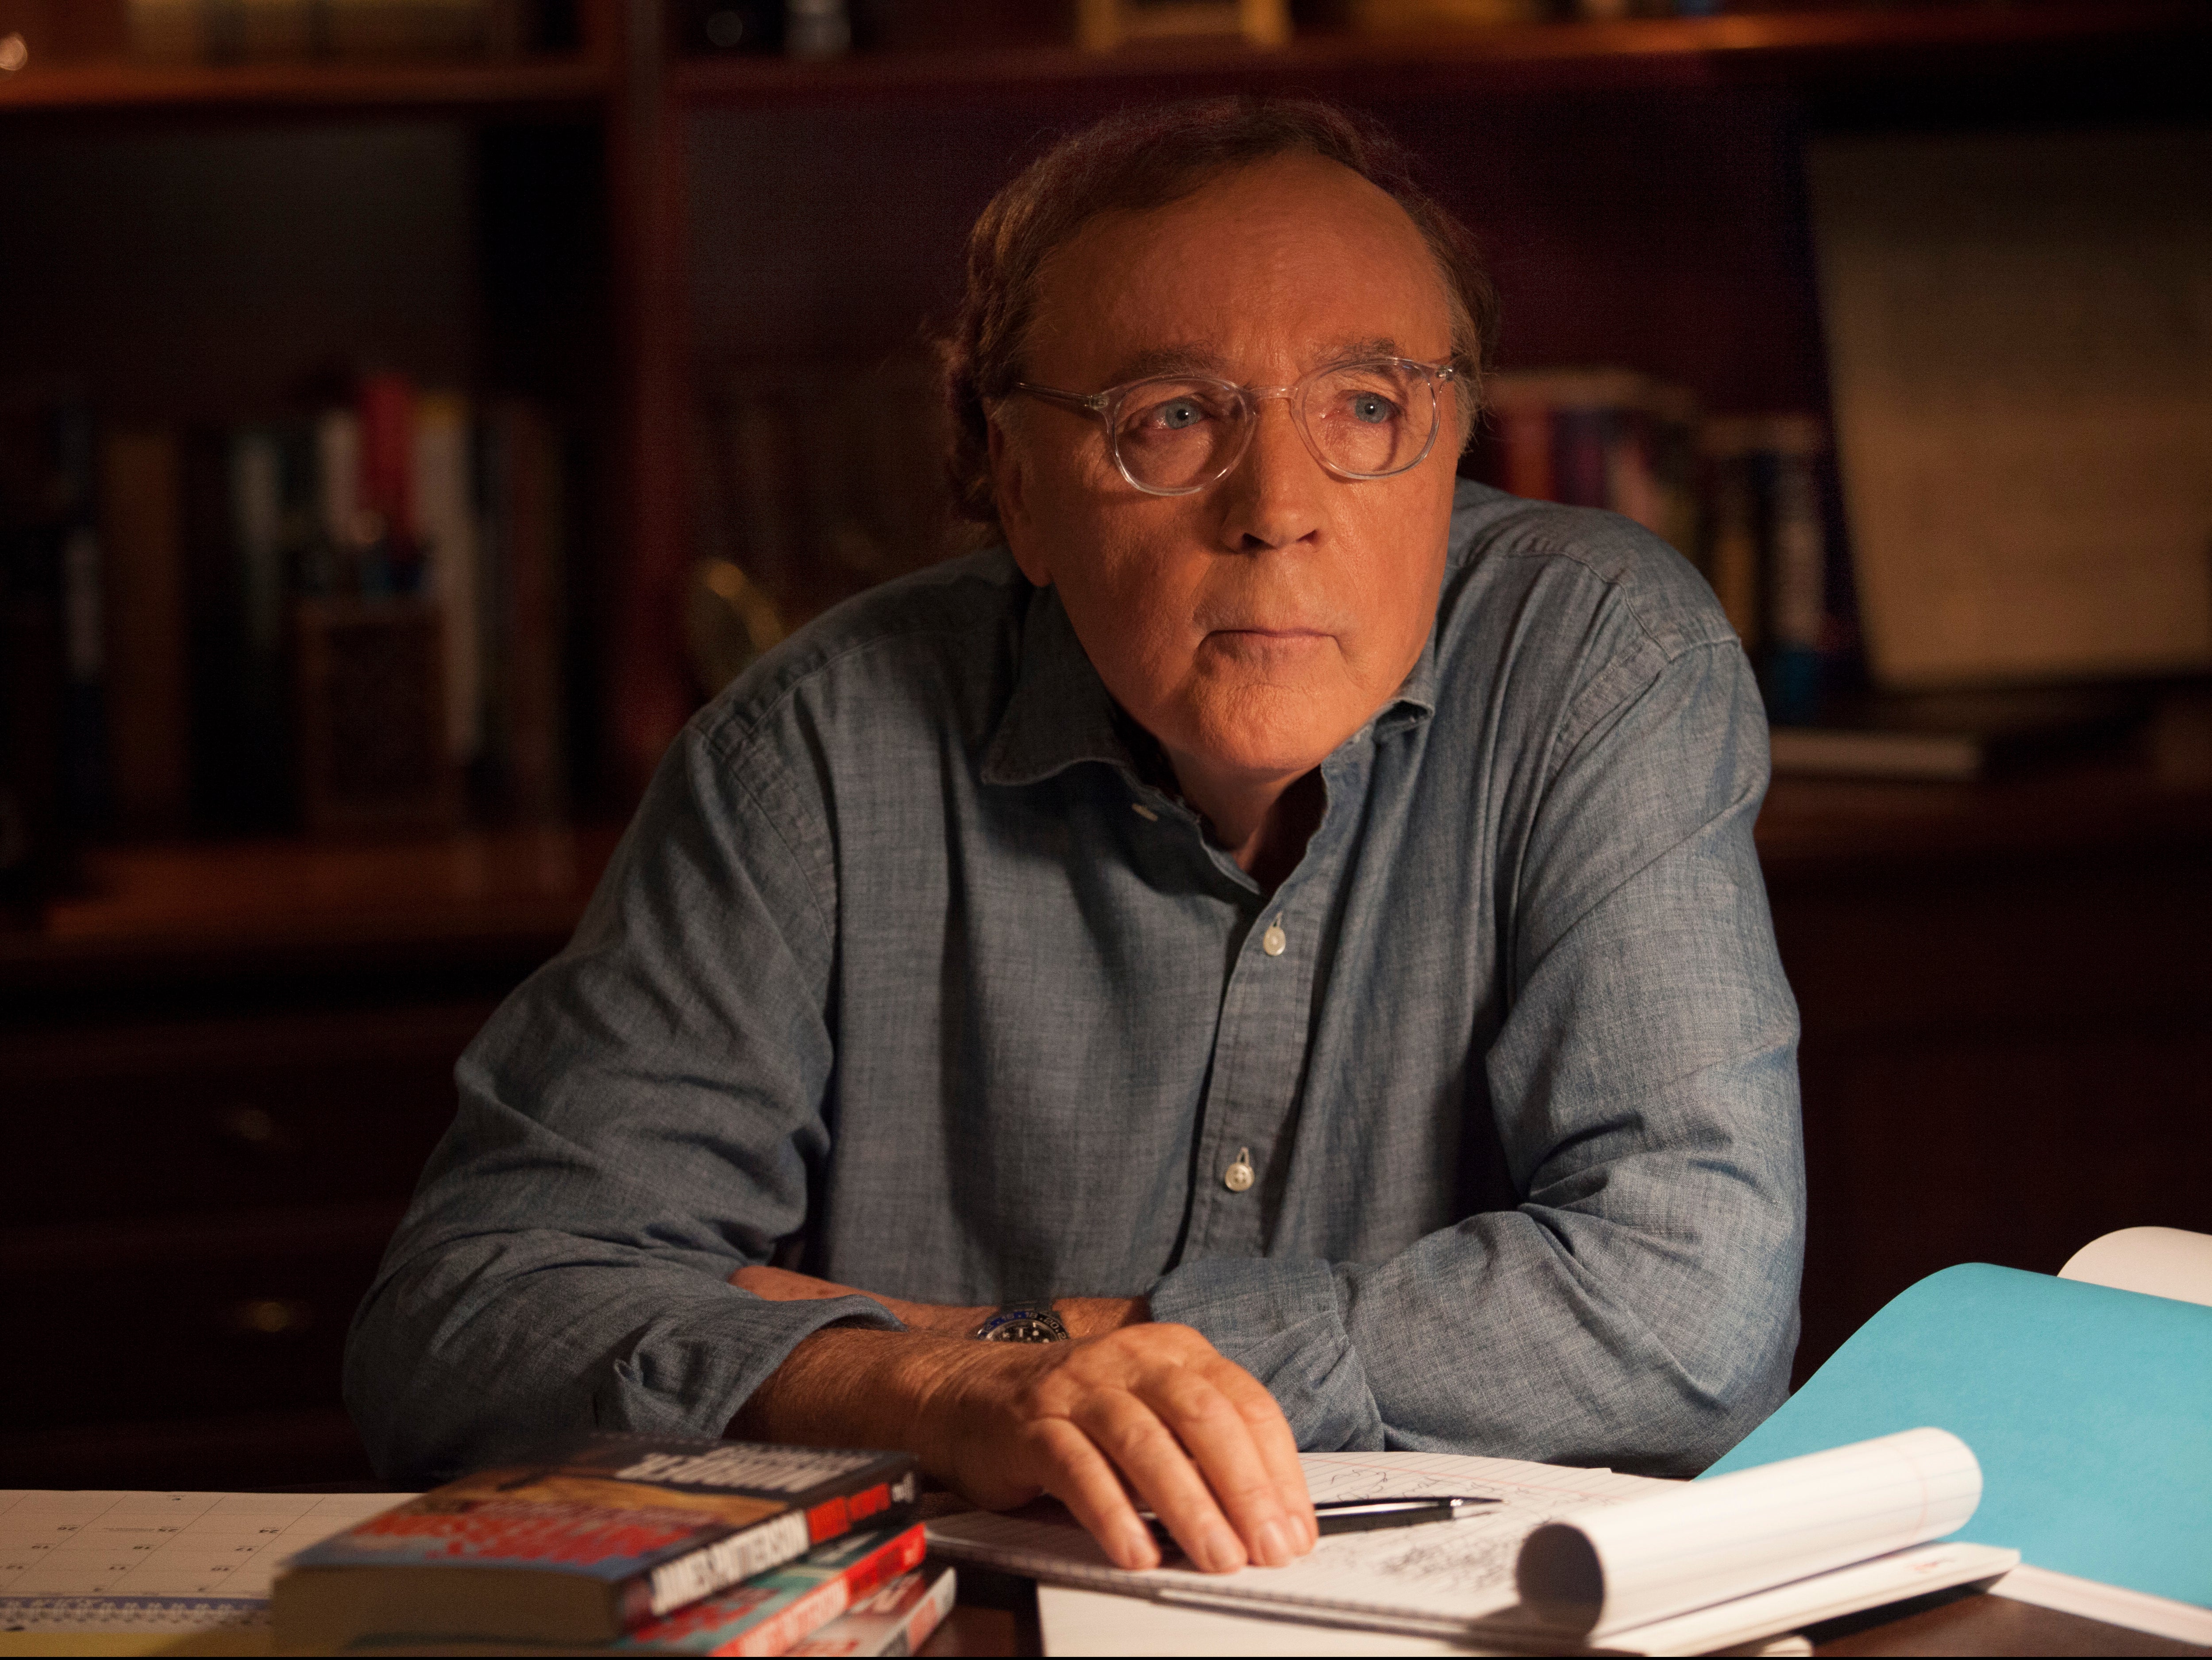 James Patterson: ‘Critics will go: ‘This isn’t very realistic!’ That’s like looking at a Picasso and saying: ‘Well, this isn’t very realistic!’'